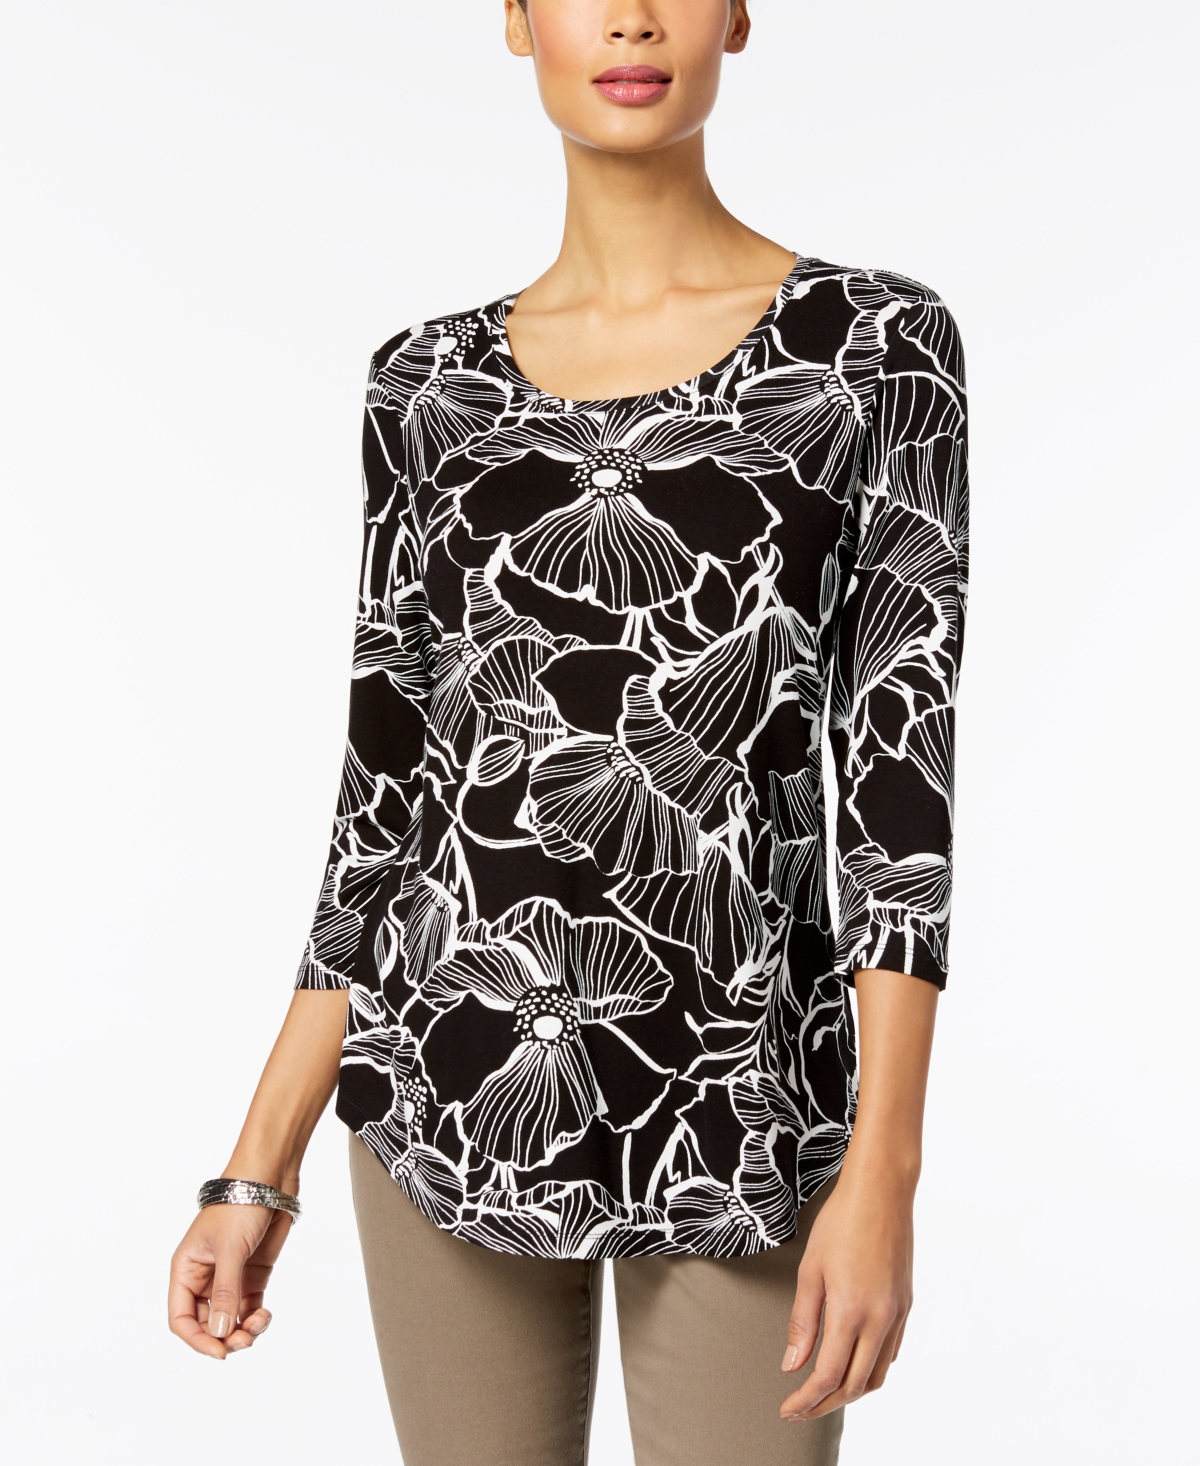 Petite 3/4-Sleeve Printed Top, Created for Macy's - Black Silhouette